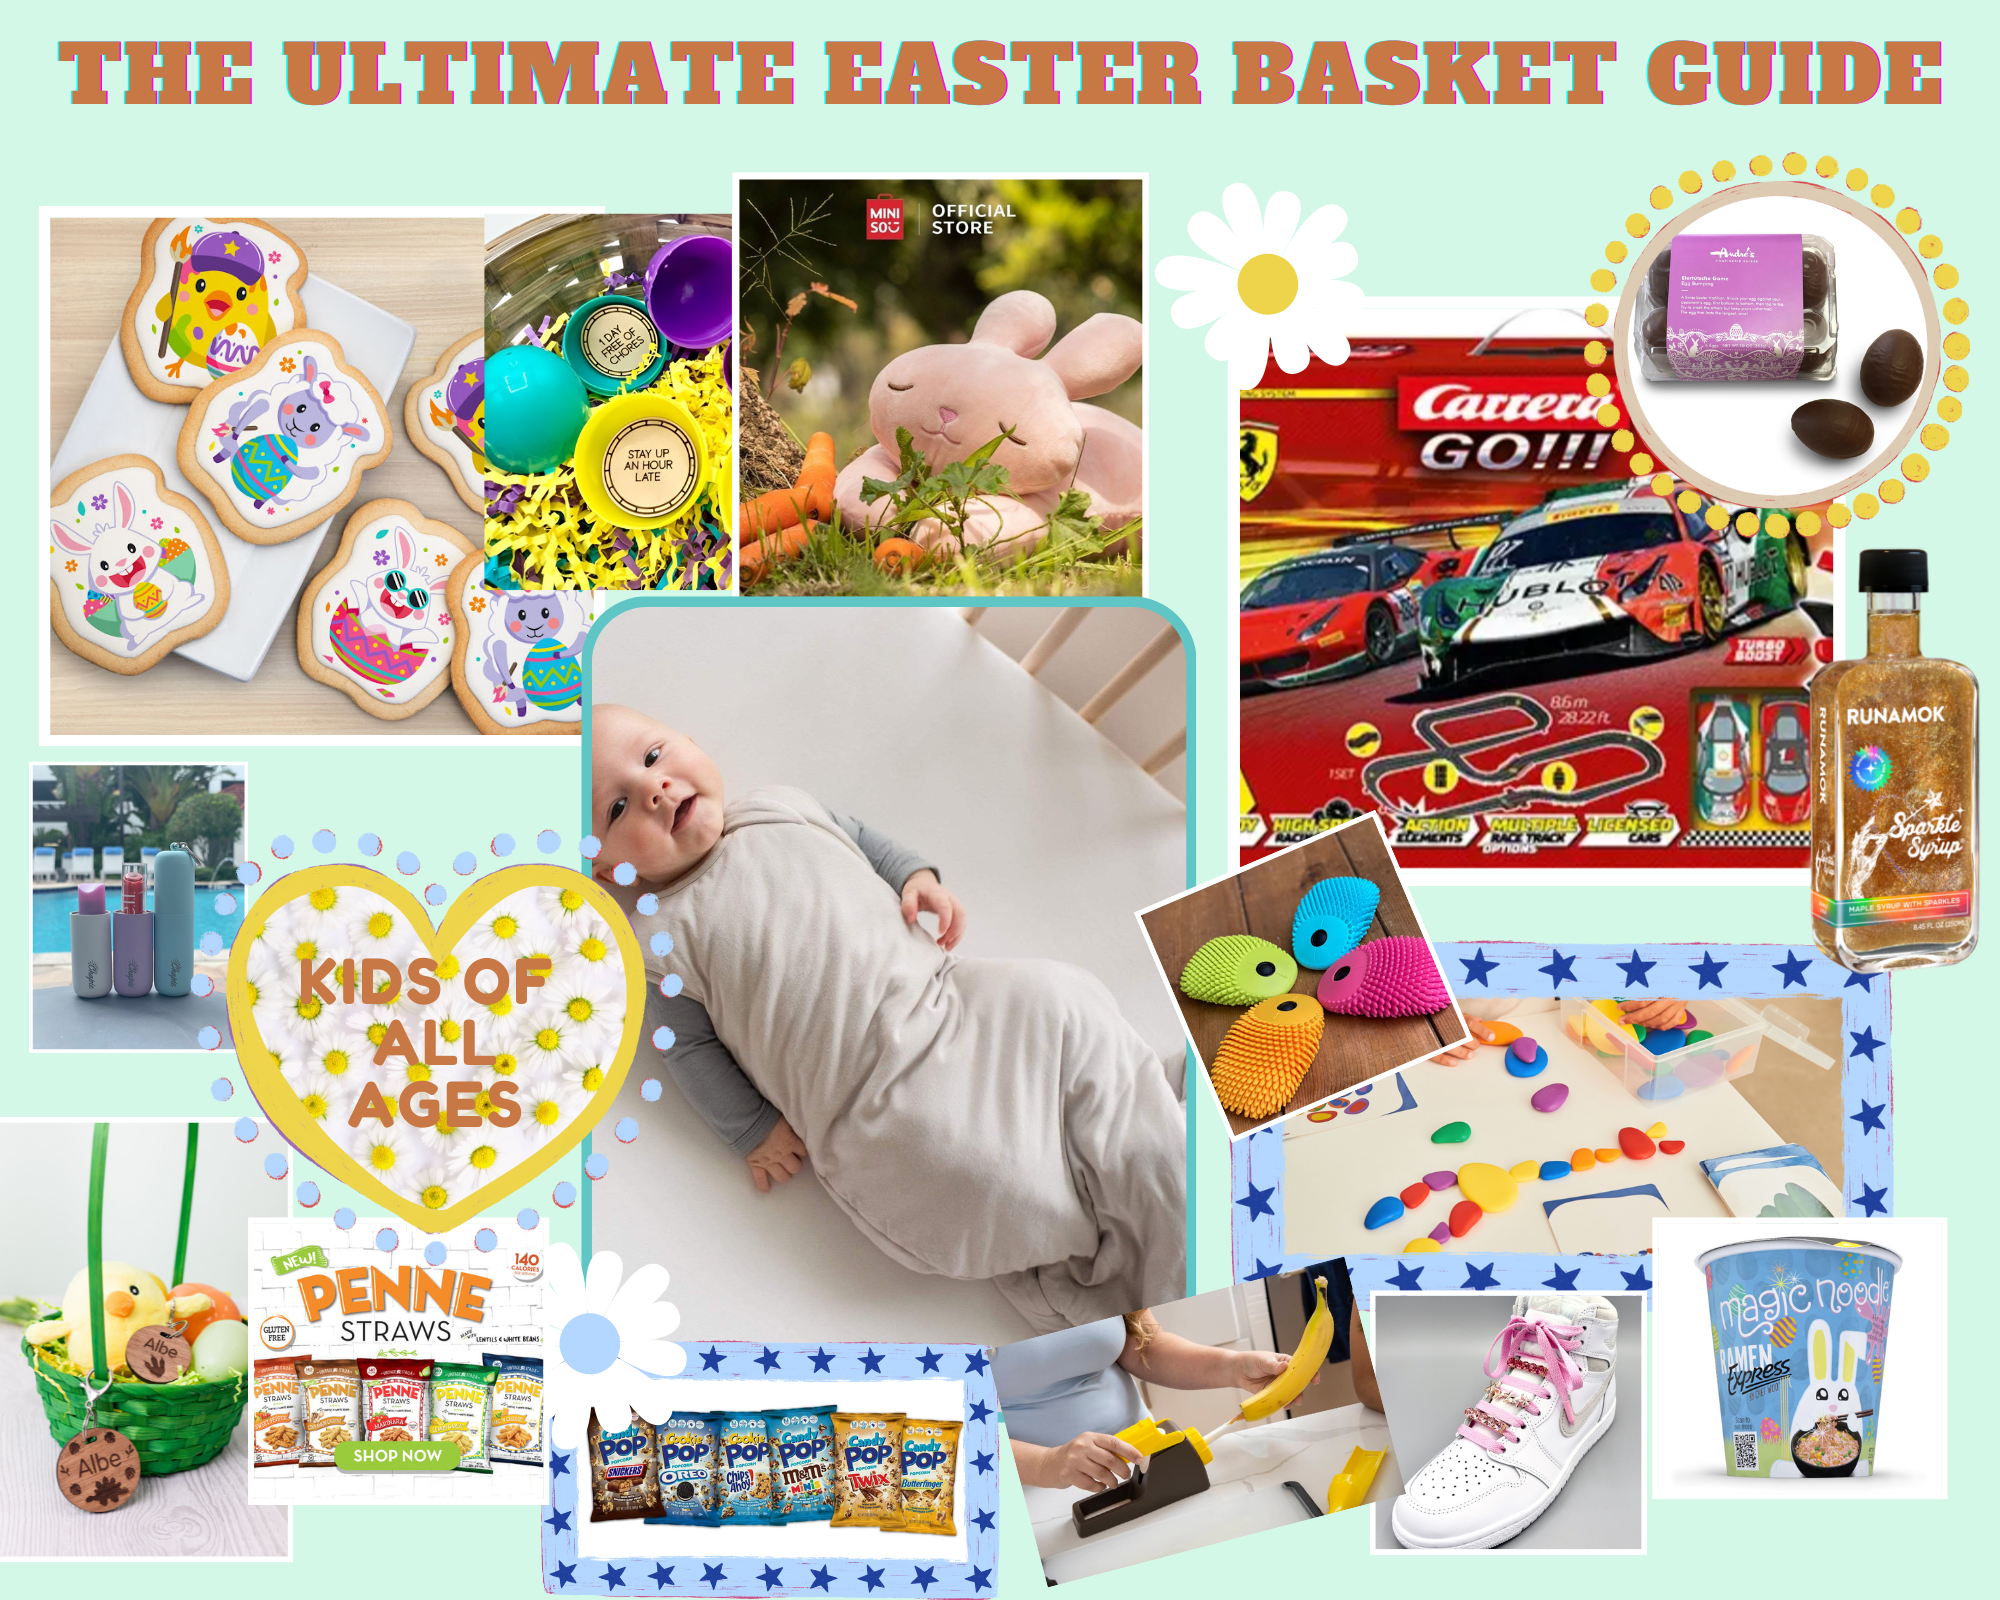 The Ultimate Easter Basket Guide